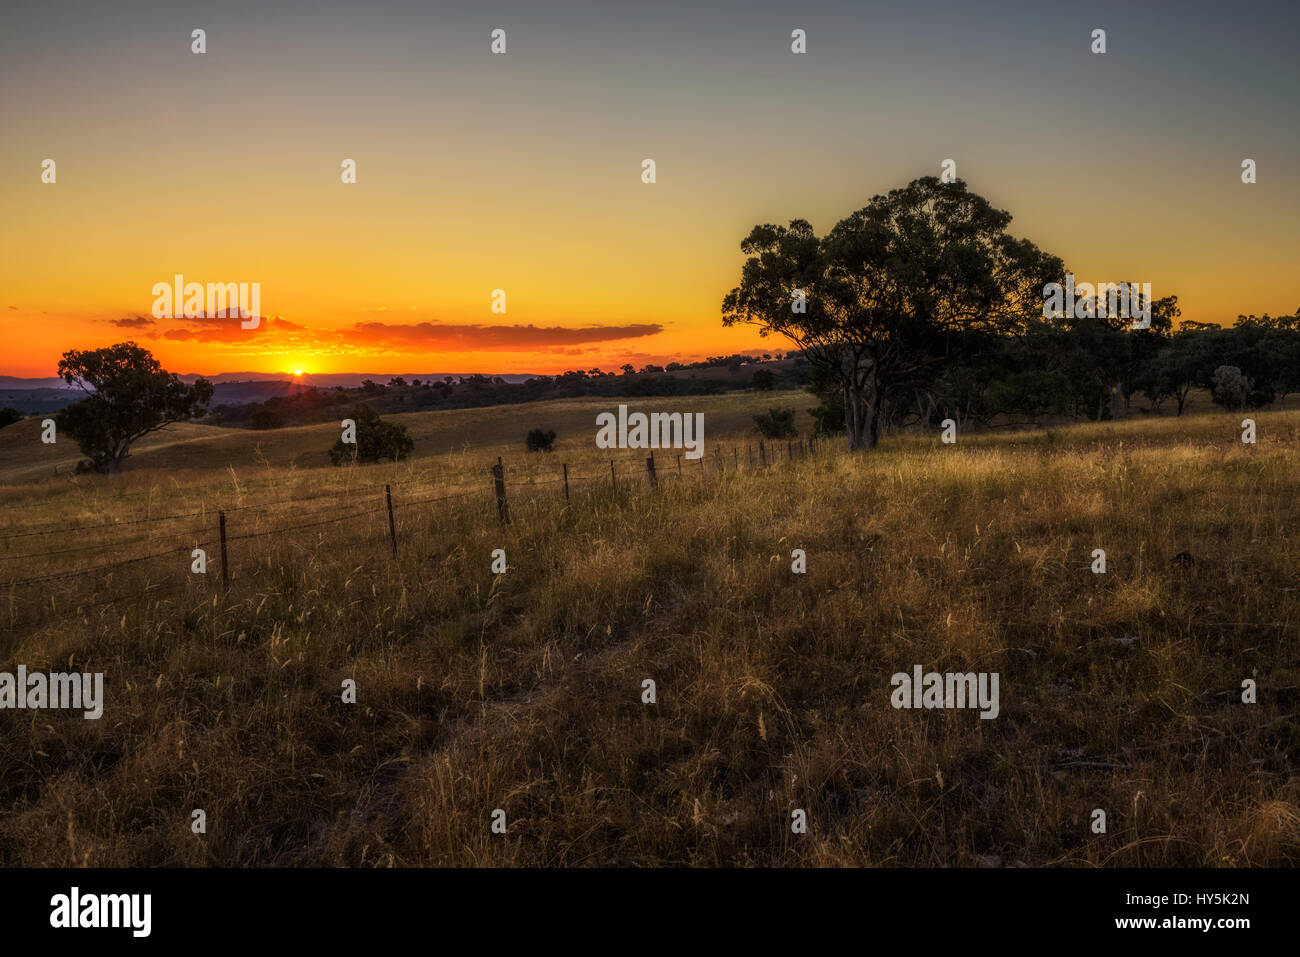 Scenic countryside landscape at sunset in Australia Stock Photo